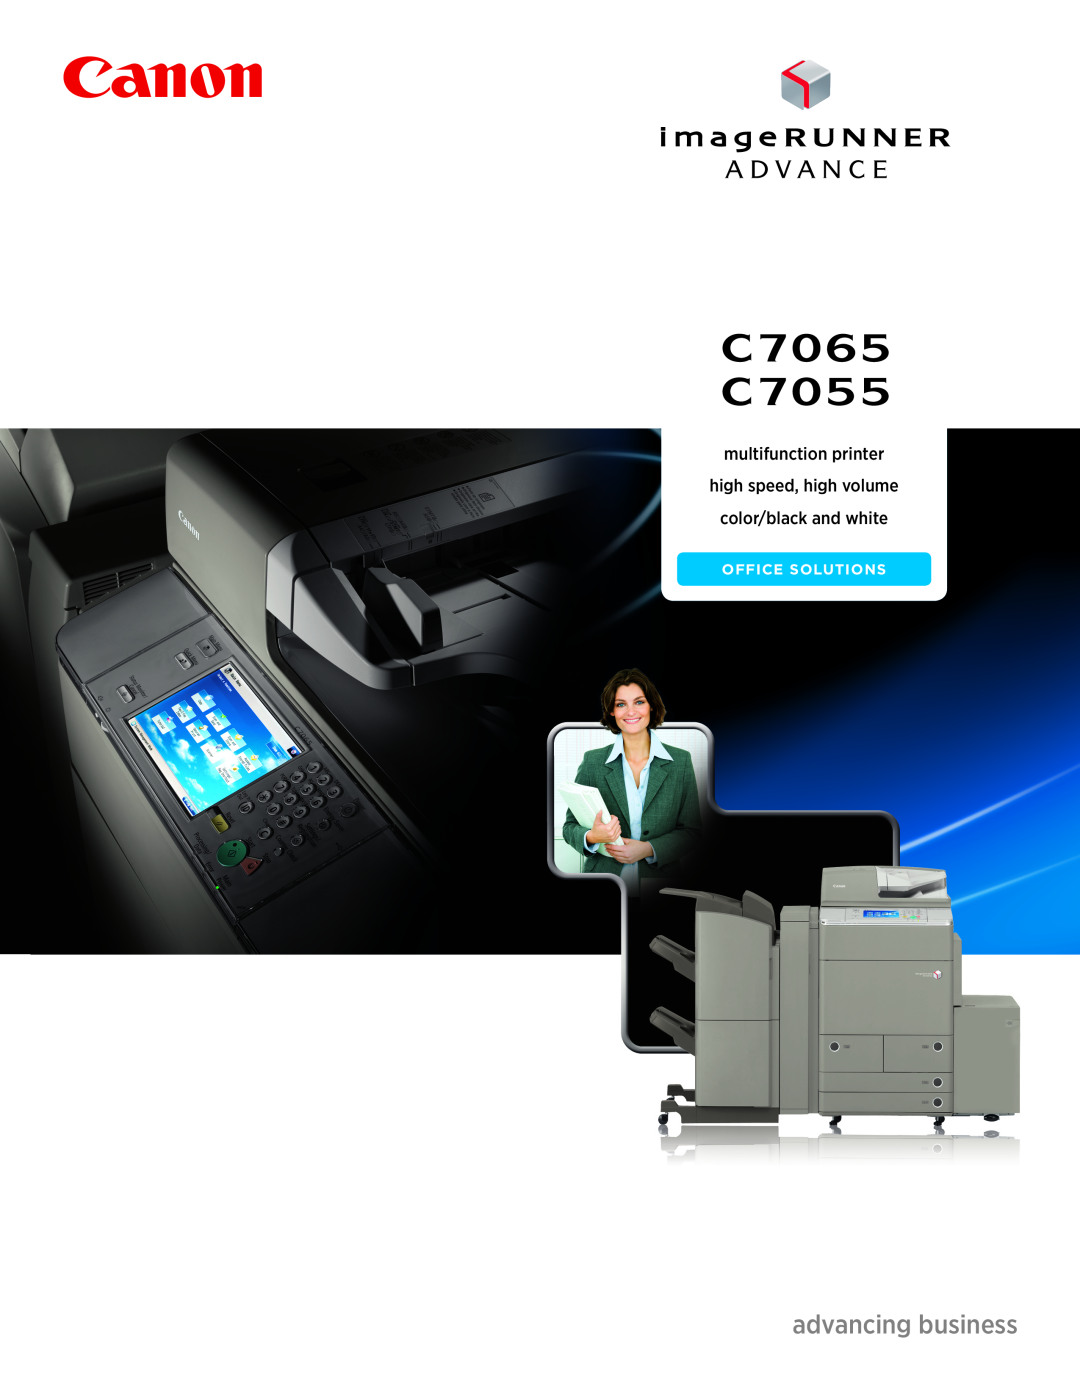 Canon C7065 manual multifunction printer multifunction system, high speed, high volume brilliant color/black-and-white 